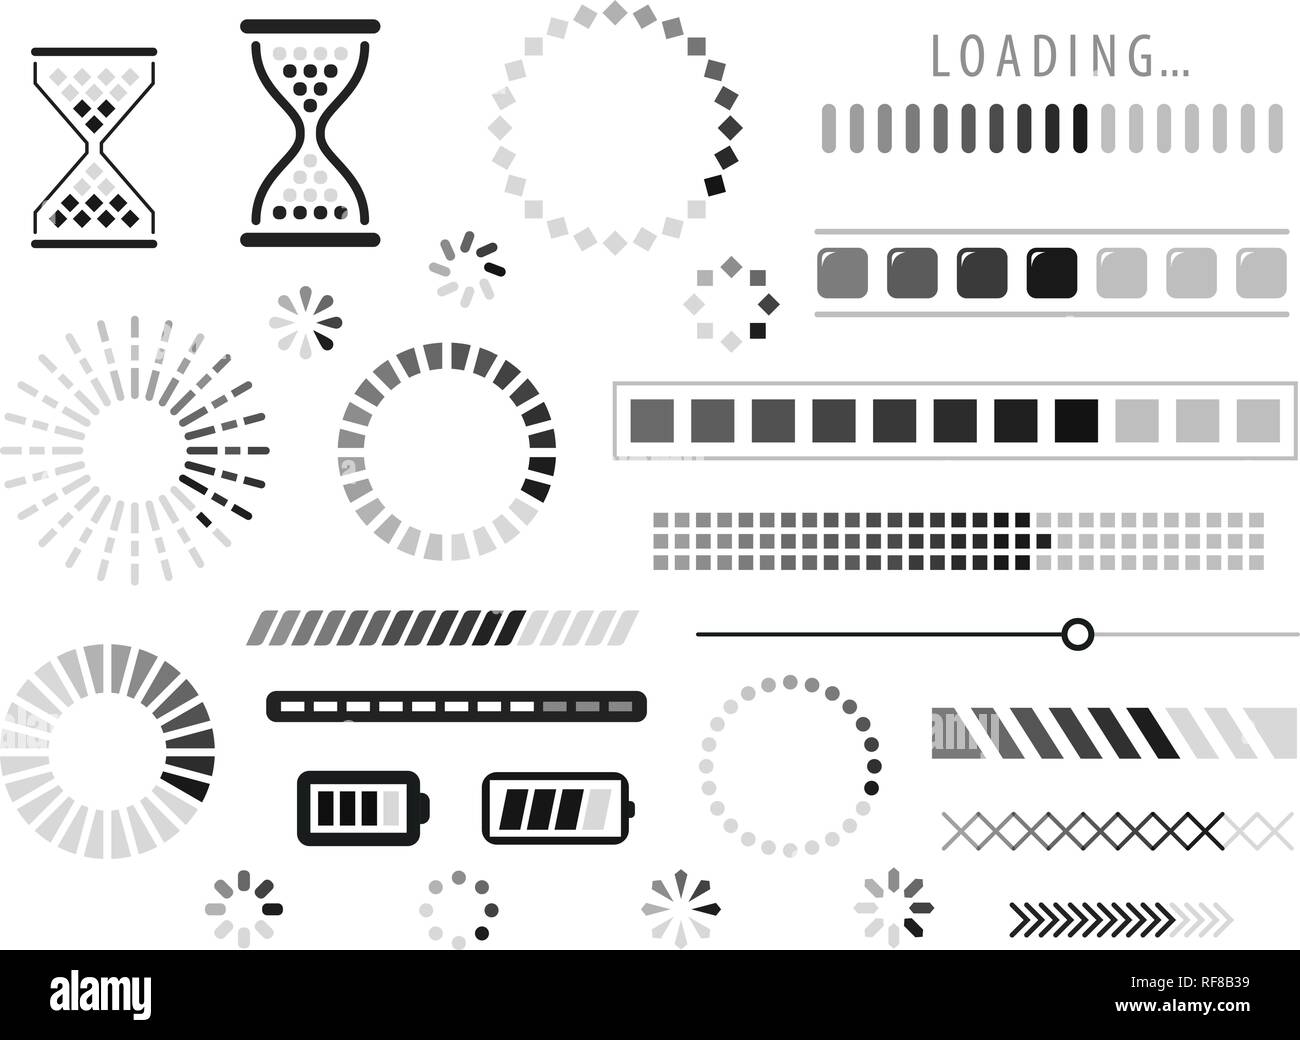 Loading icon. Load, download, indicator symbol. Vector Stock Vector